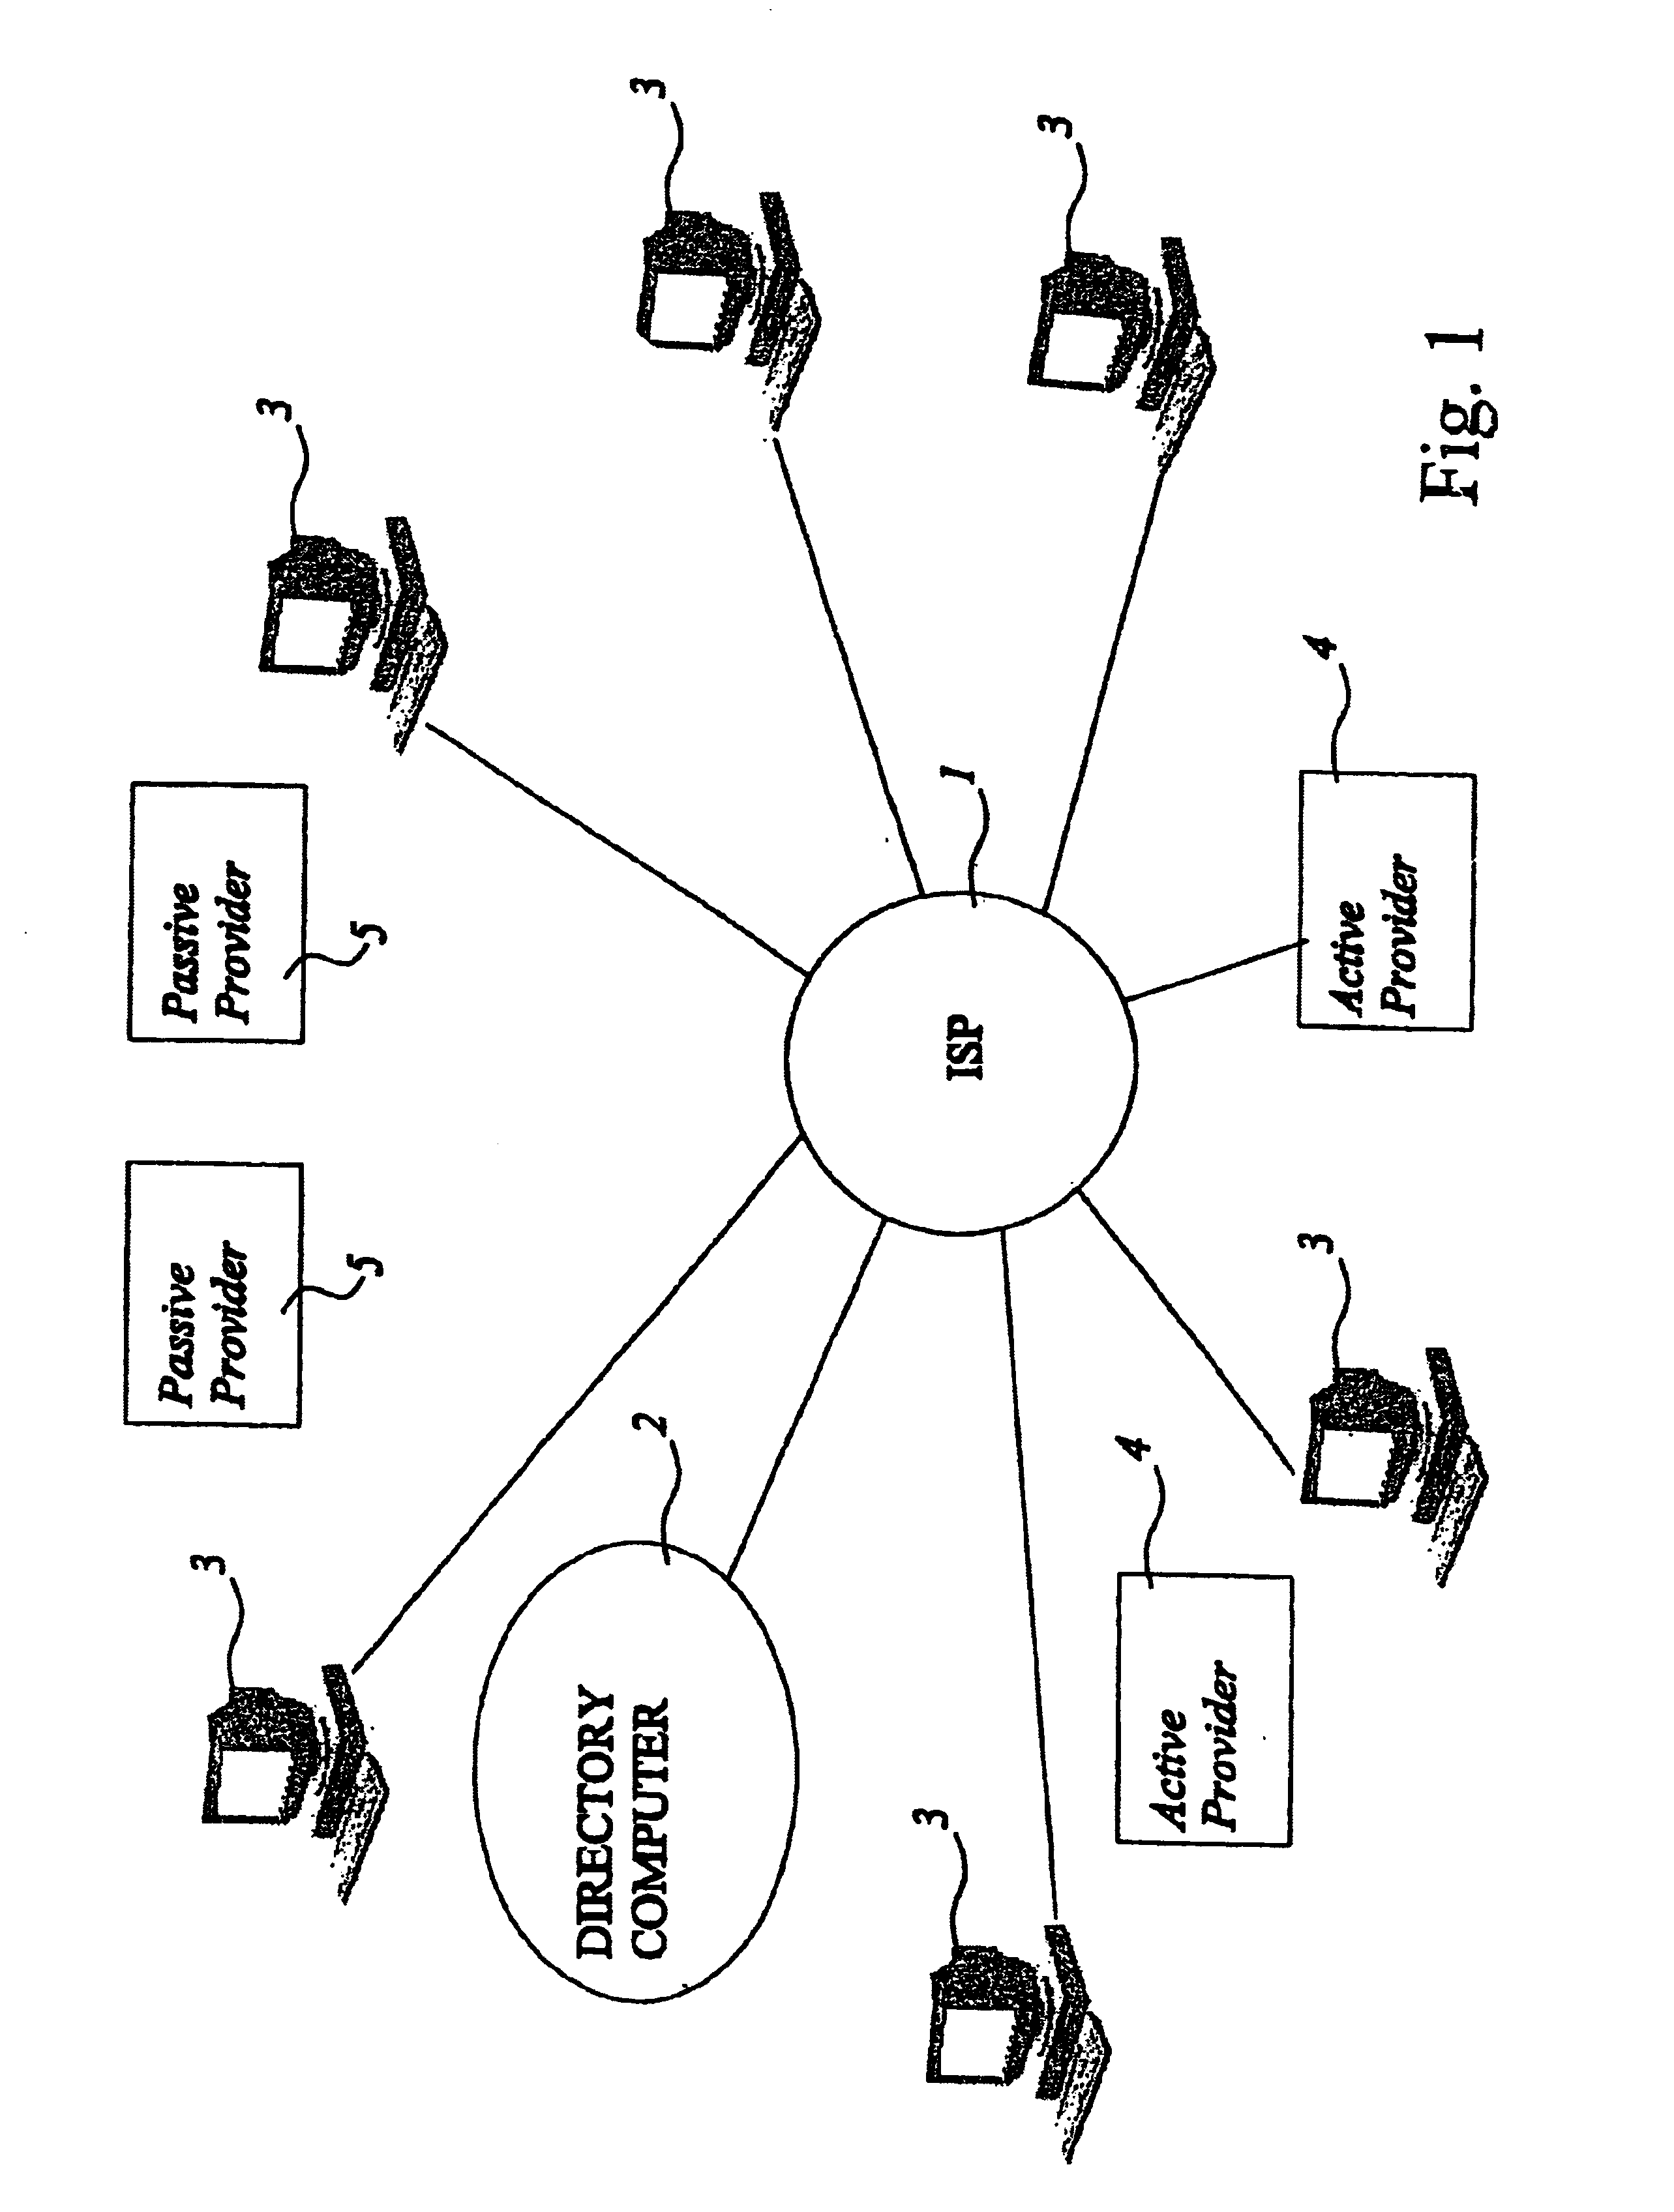 Information directory system